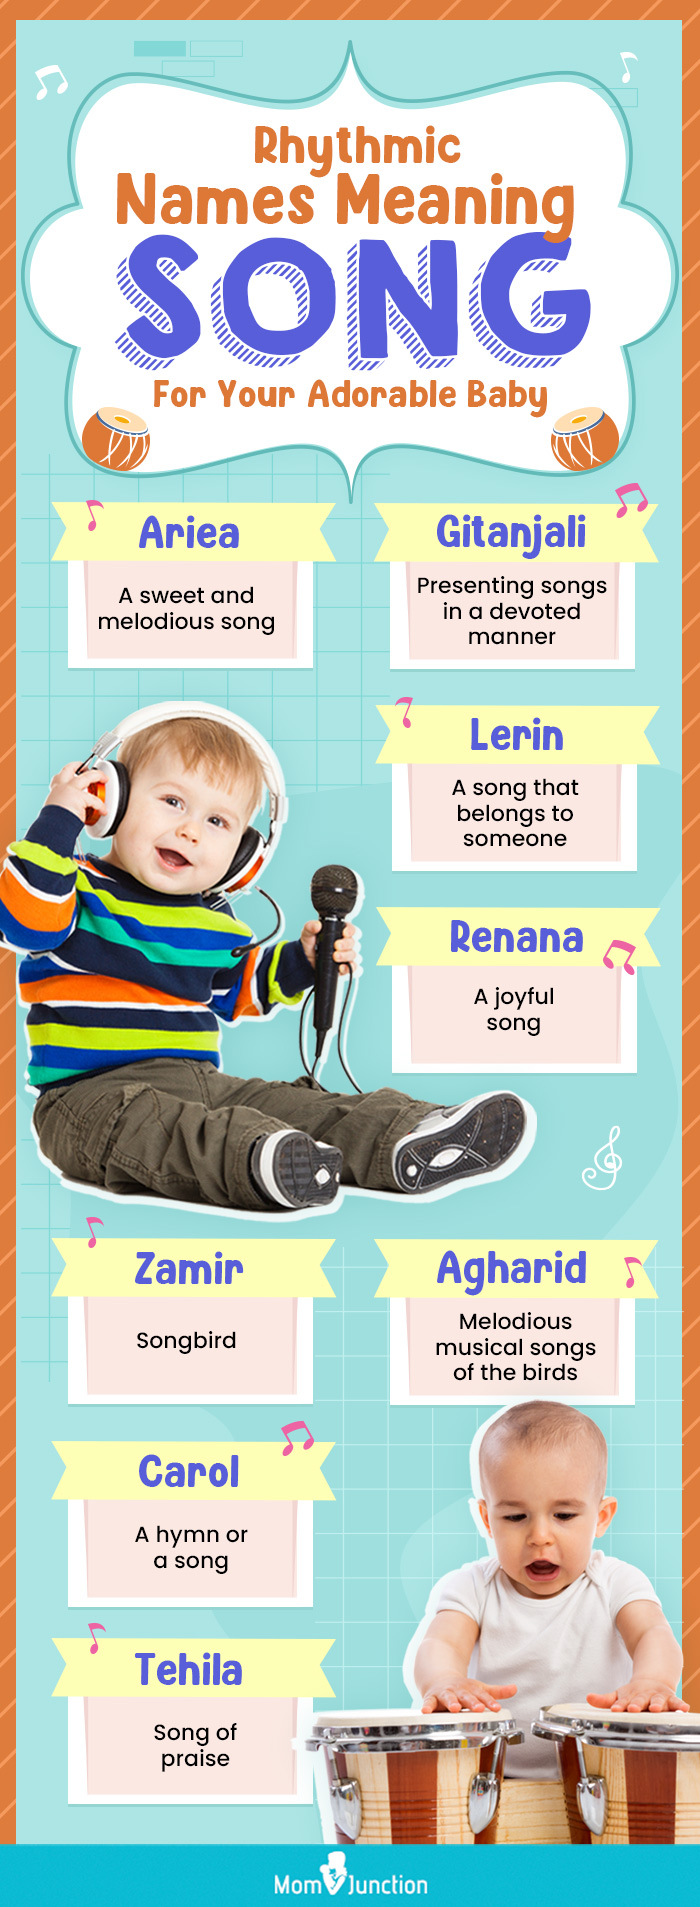 rhythmic names meaning song for your adorable baby (infographic)